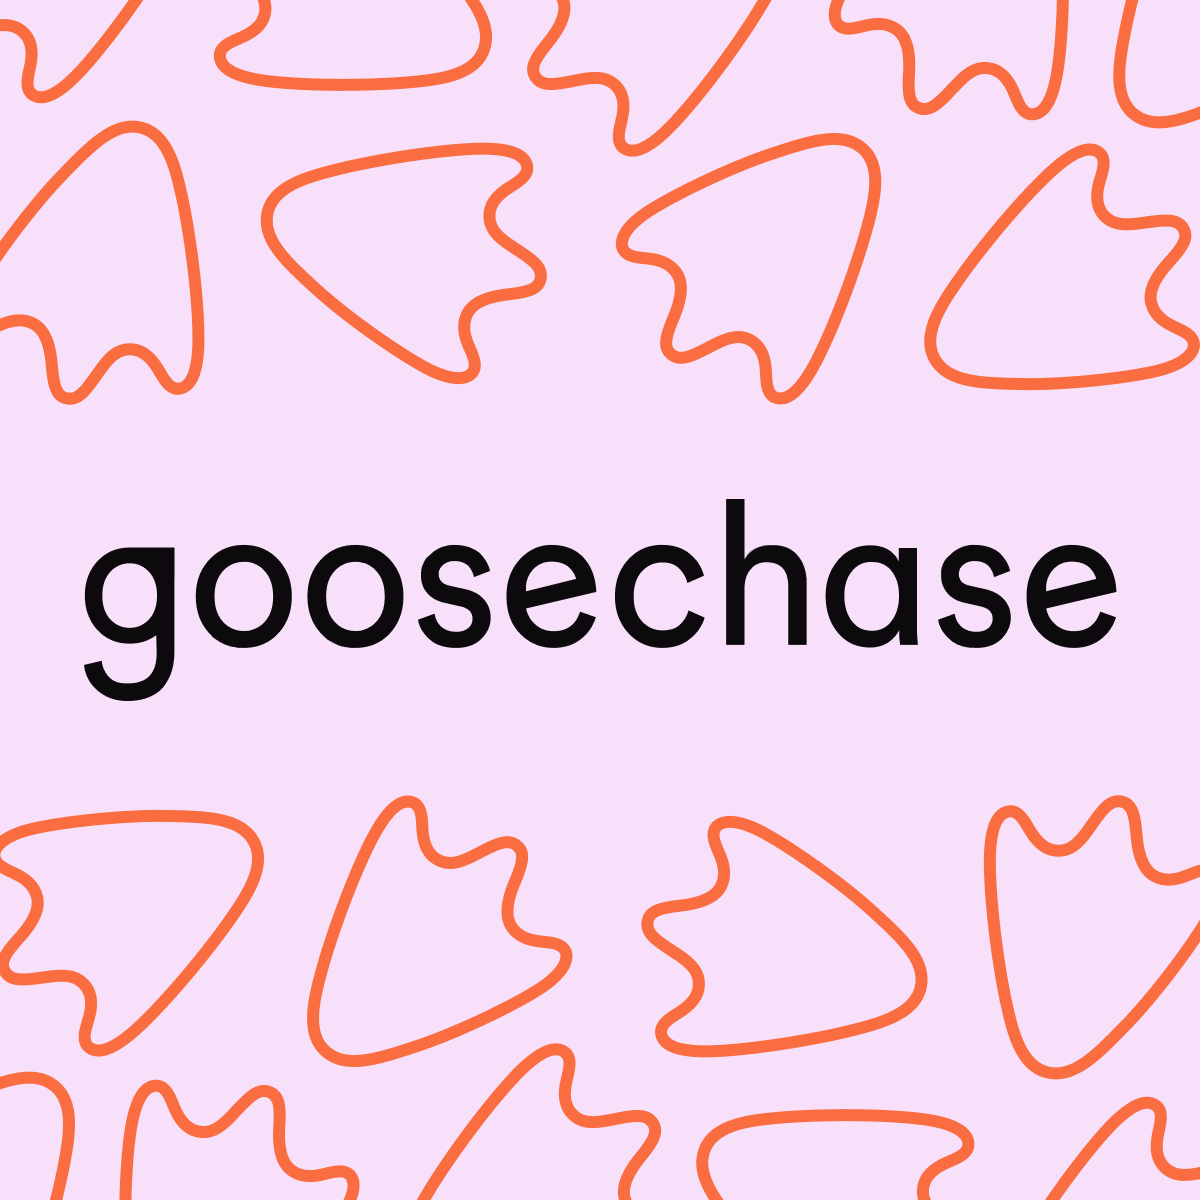 Goose.IO - Free to Play & Download on PC - Go On A Chase!